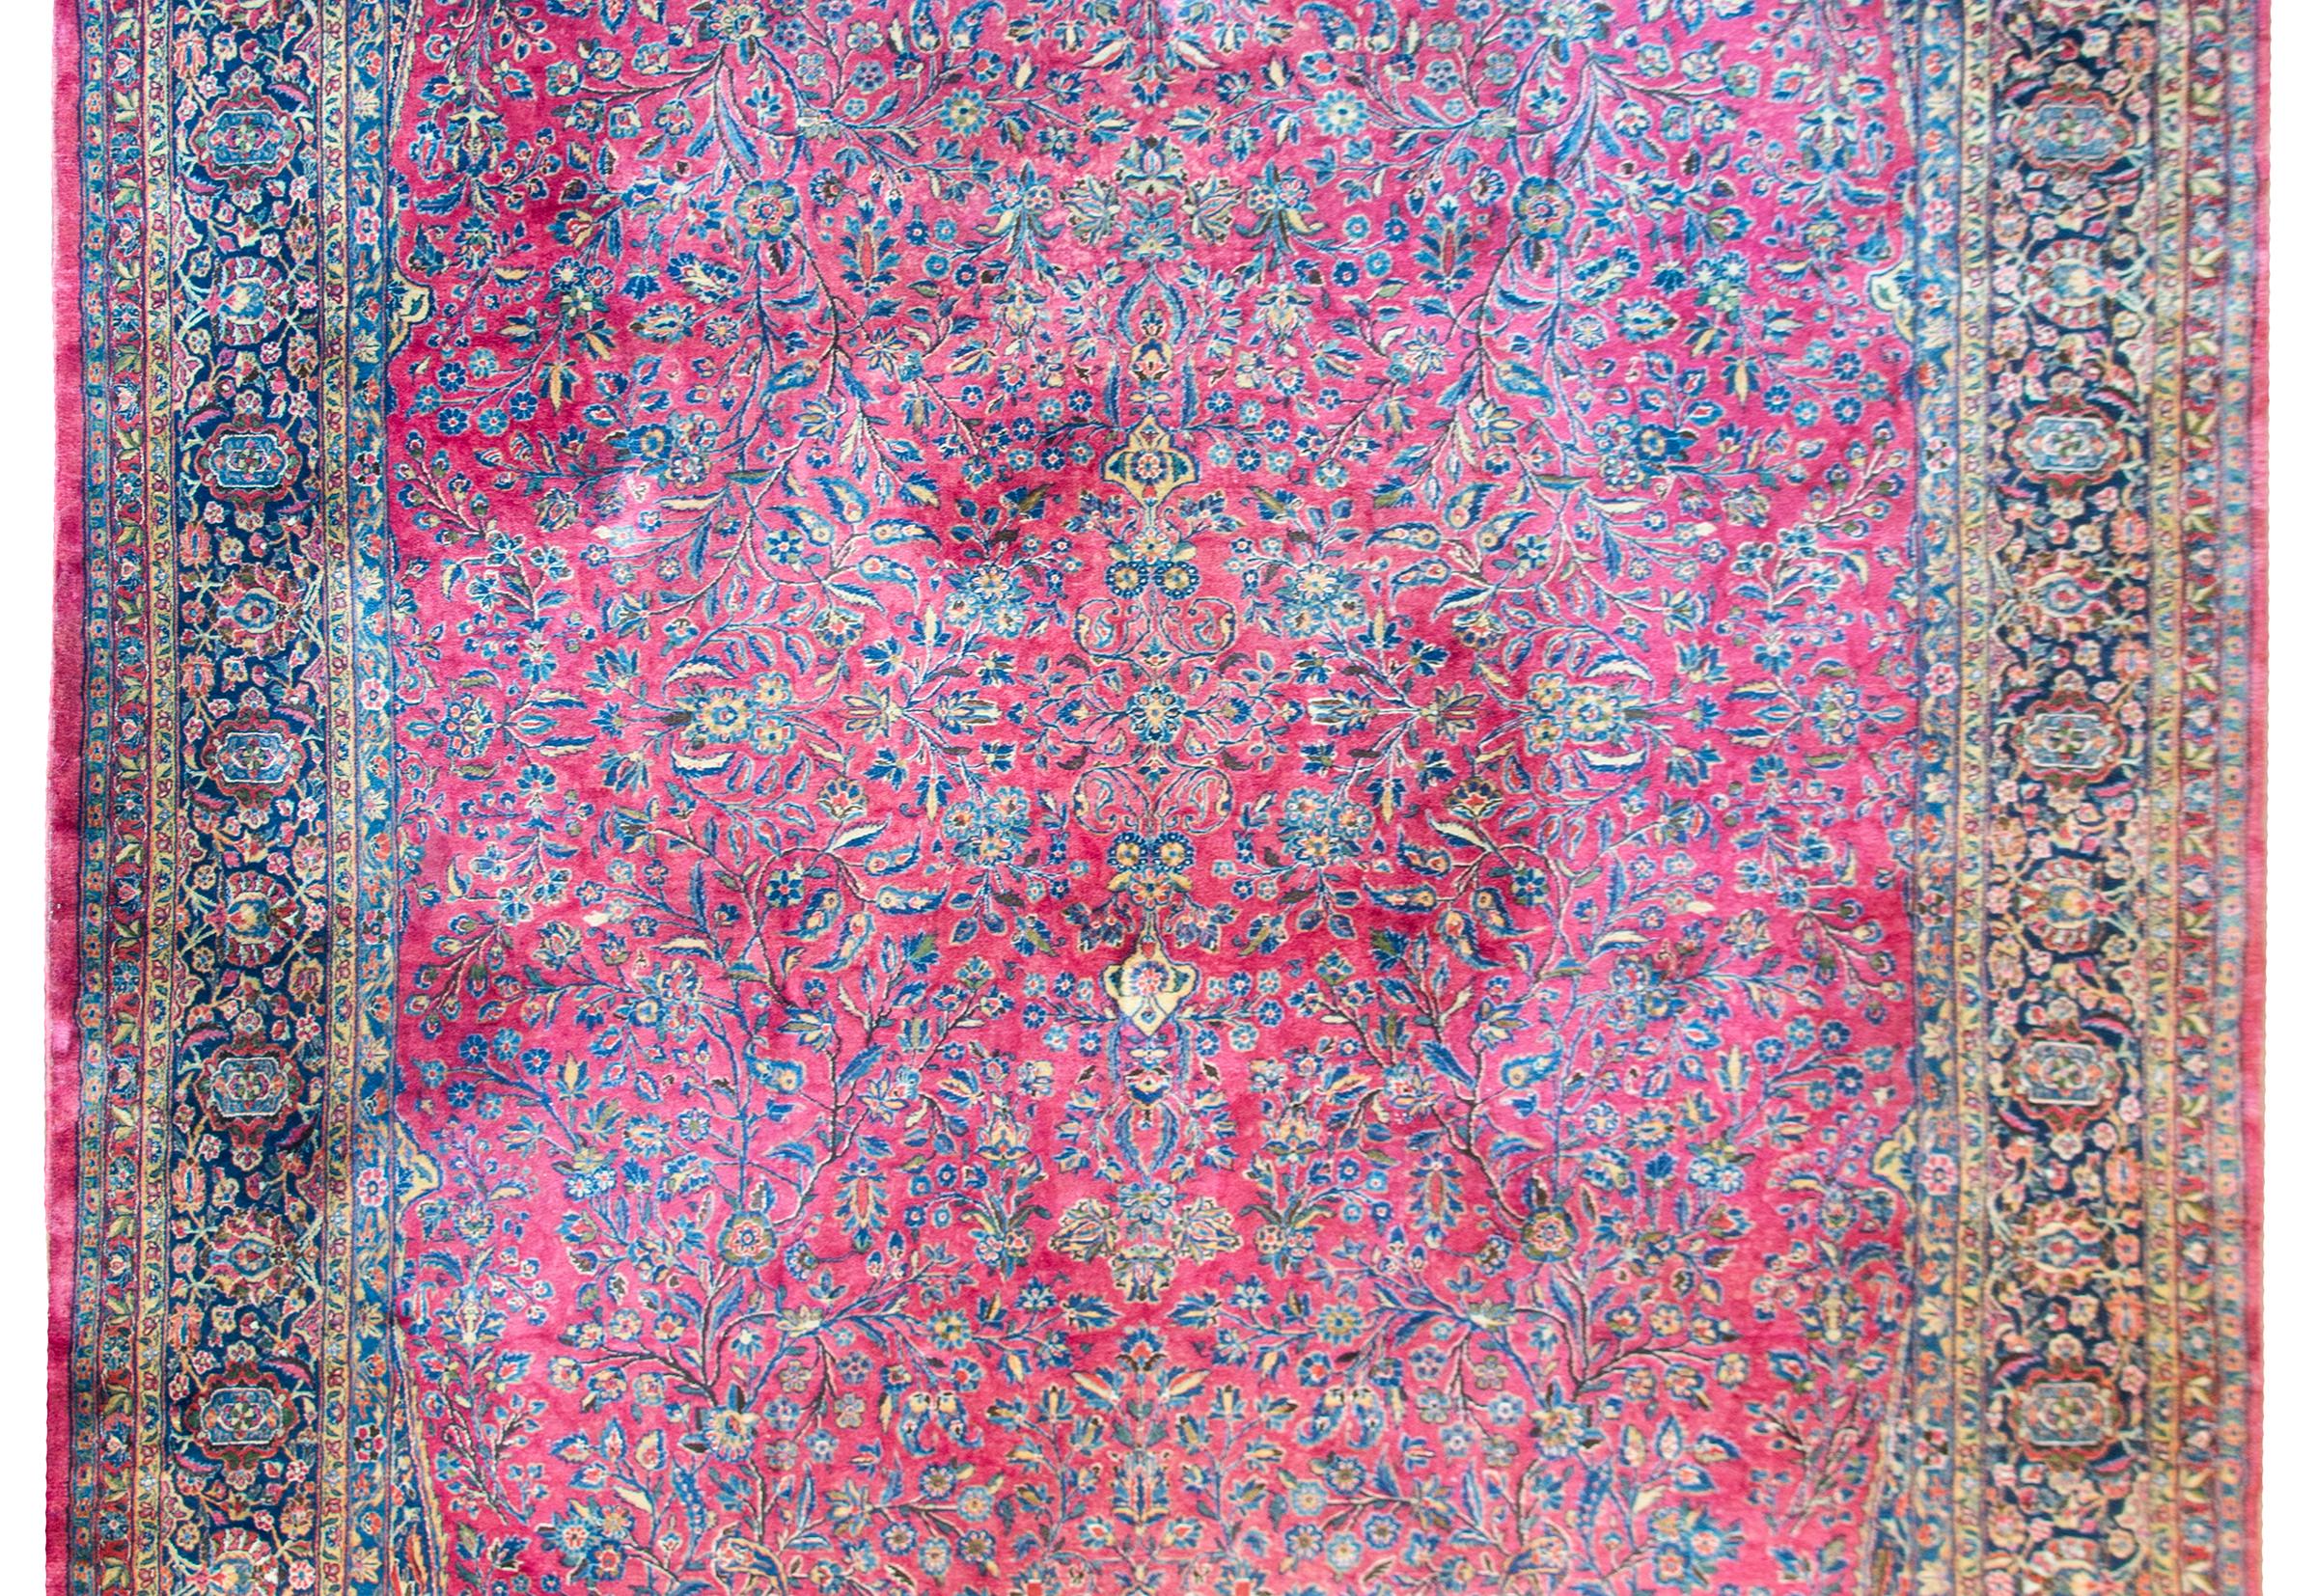 A wonderful early 20th century Persian Kashan rug with an all-over floral and scrolling vine pattern woven in indigos, creams, and pinks, and set against a cranberry colored field, and all surrounded by a complex wide floral and scrolling vine